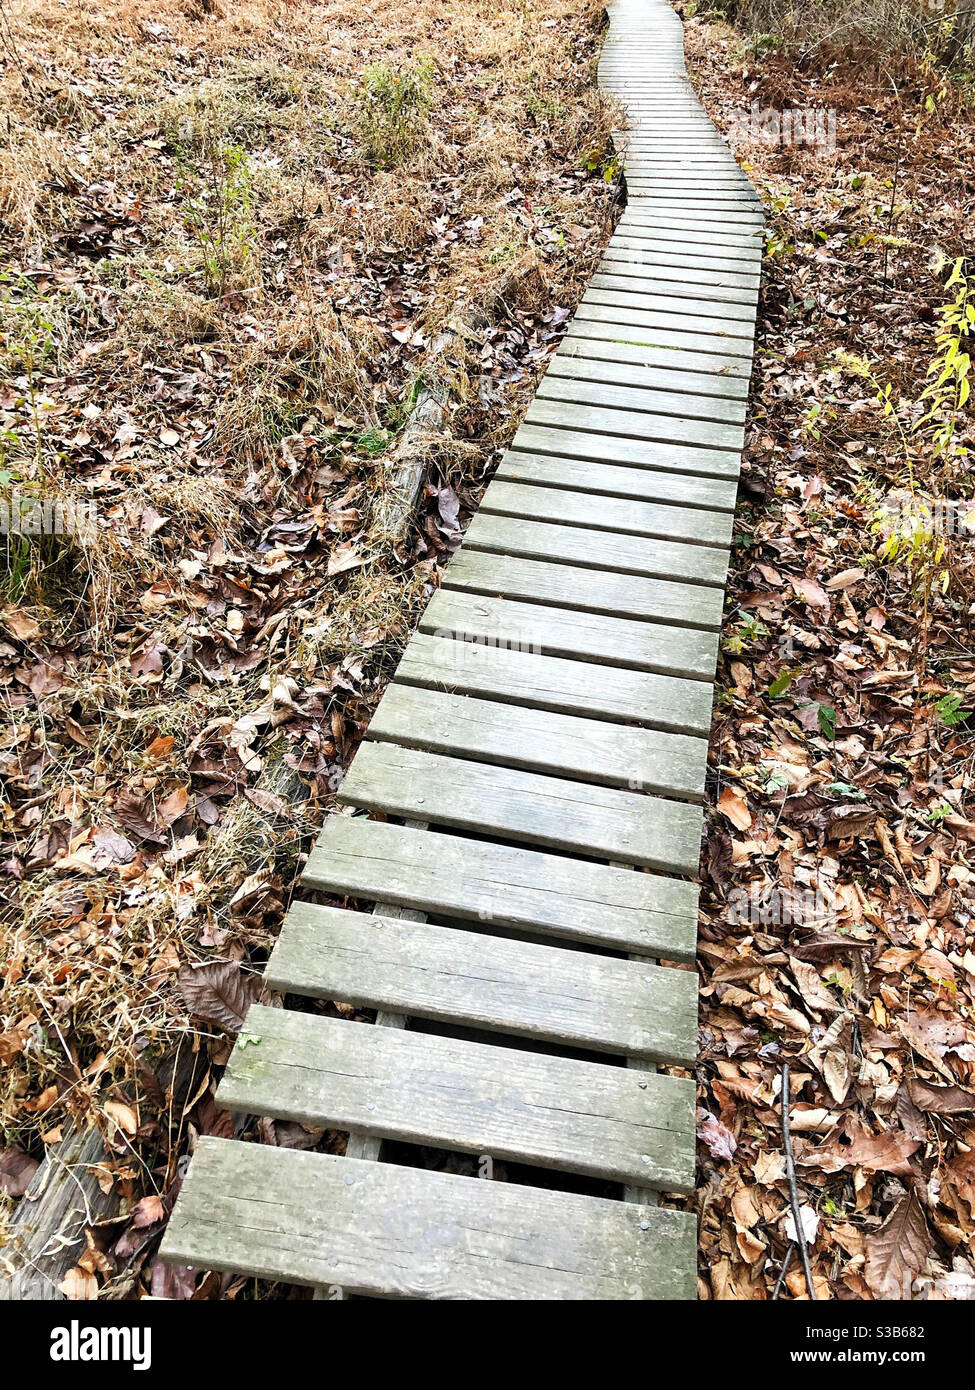 Wooden walkway through a nature preserve Stock Photo